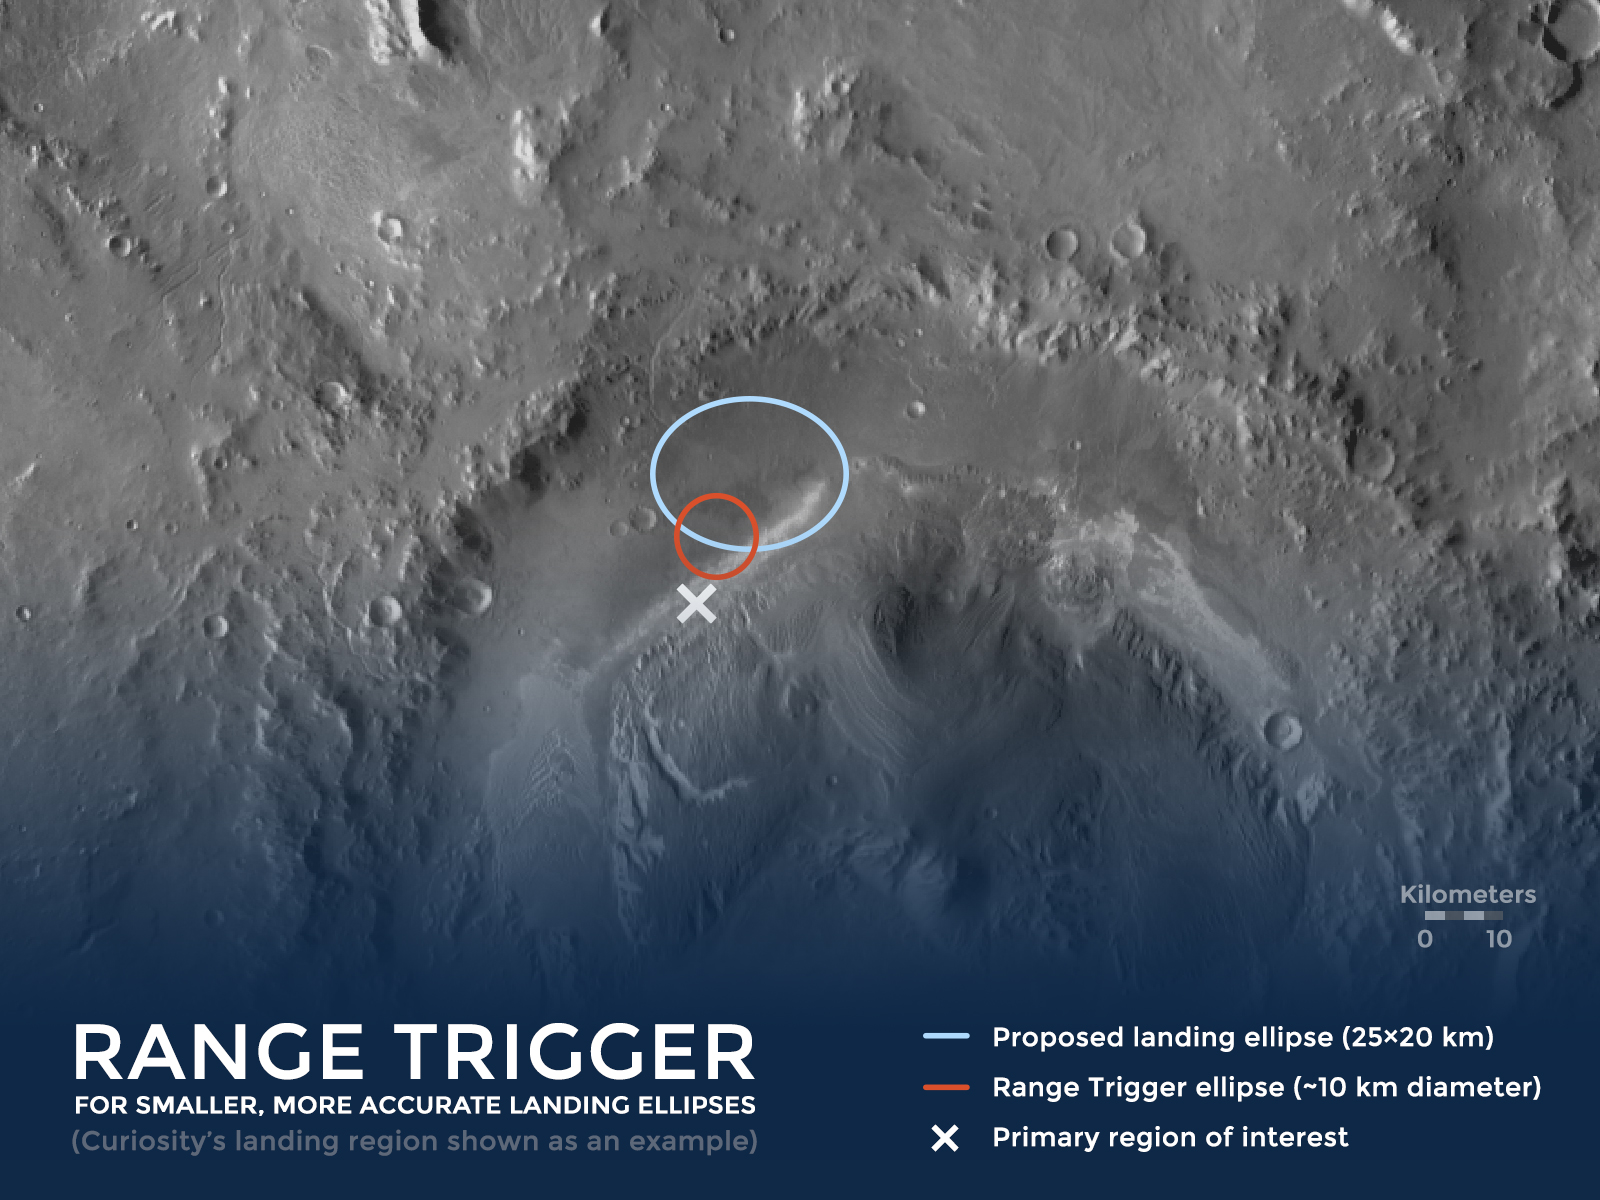 The Range Trigger technique shrinks the Mars 2020 rovers landing ellipse significantly, landing the rover closer to the target area of greatest scientific interest. This example shows Mars 2020's ellipse in relationship to Mars rover Curiosity's landing ellipse. Mars 2020 will be landing in a different location.